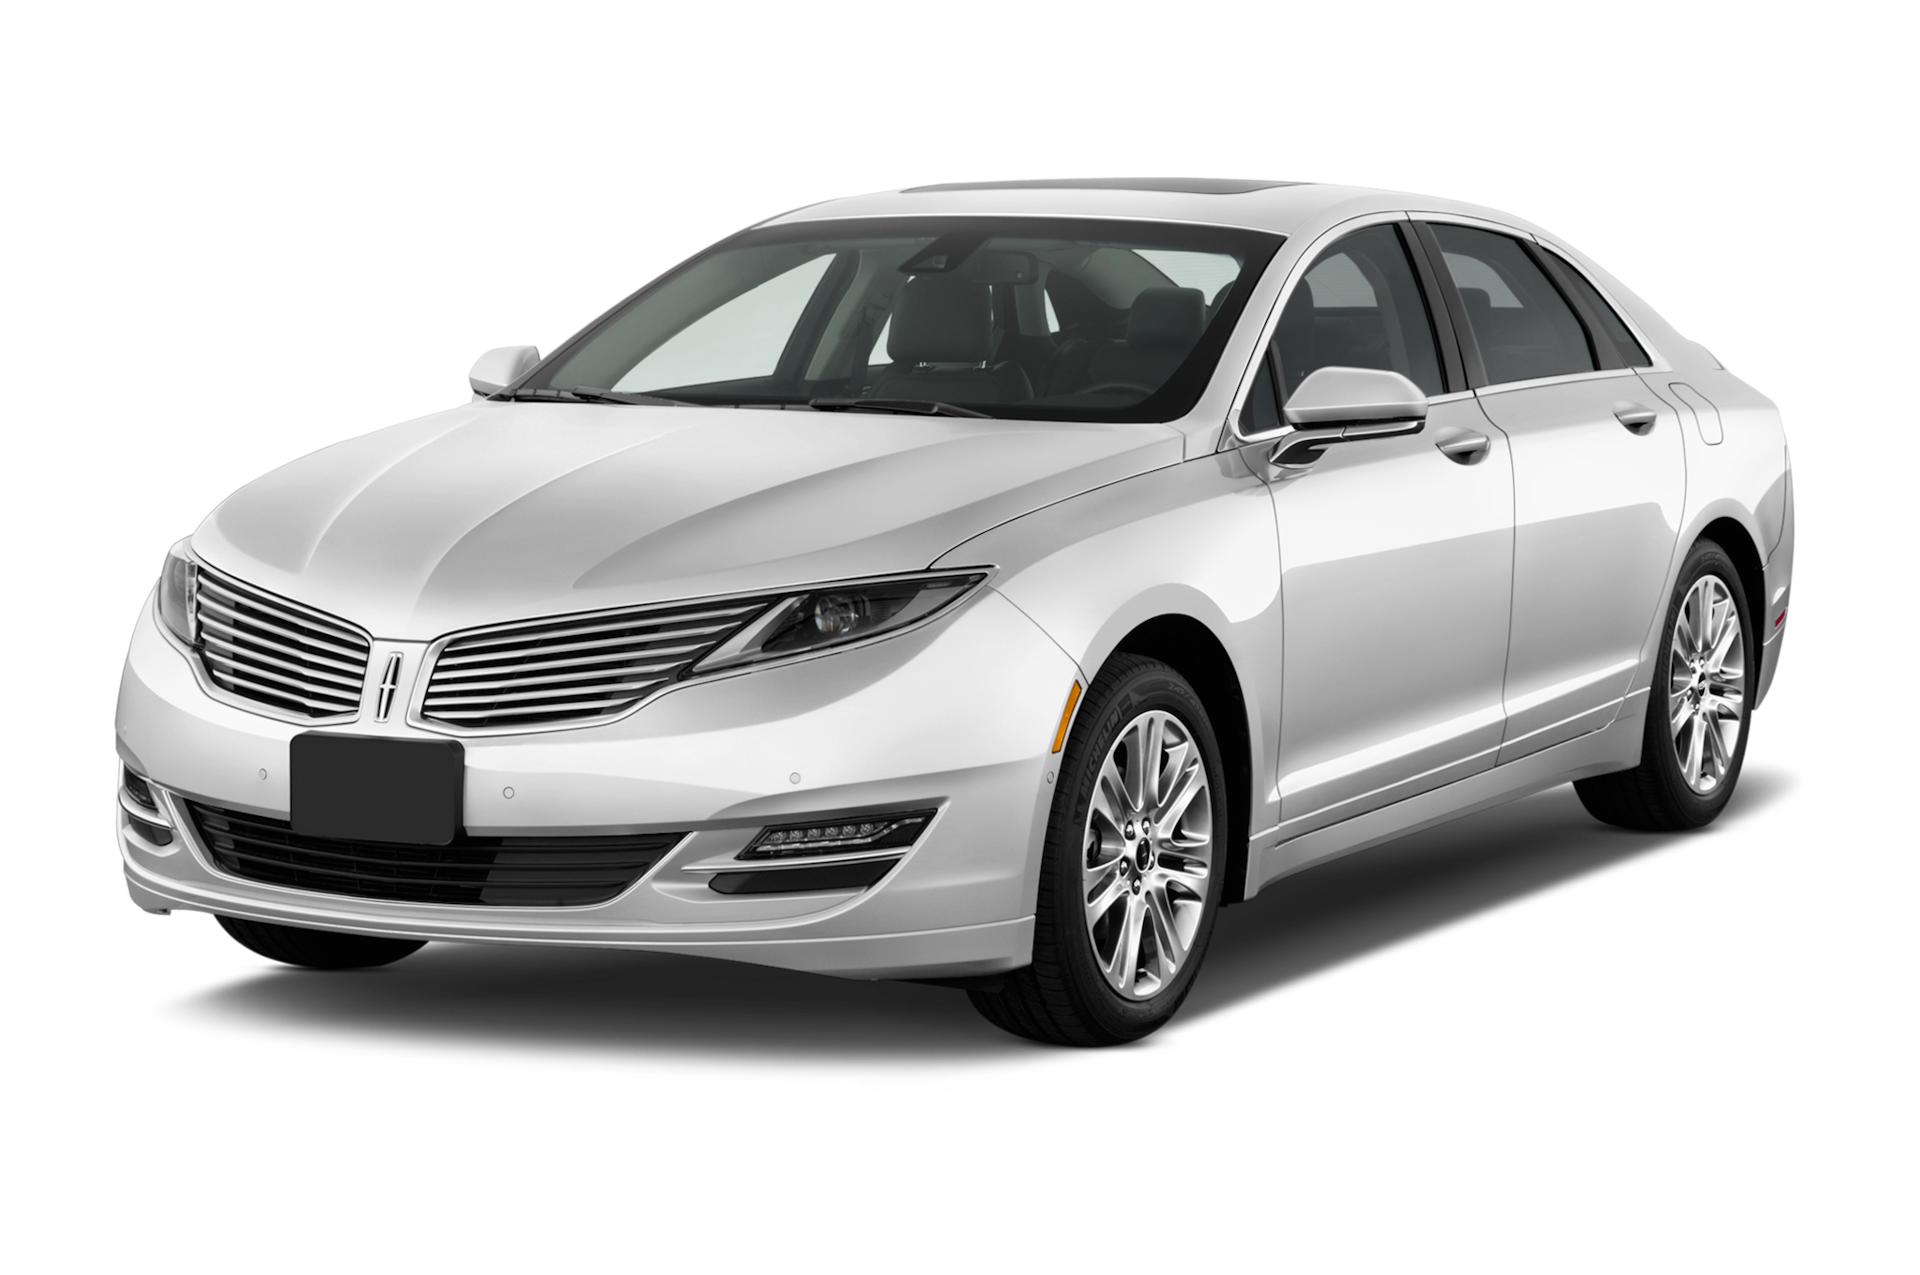 2016 Lincoln MKZ Hybrid Prices, Reviews, and Photos - MotorTrend